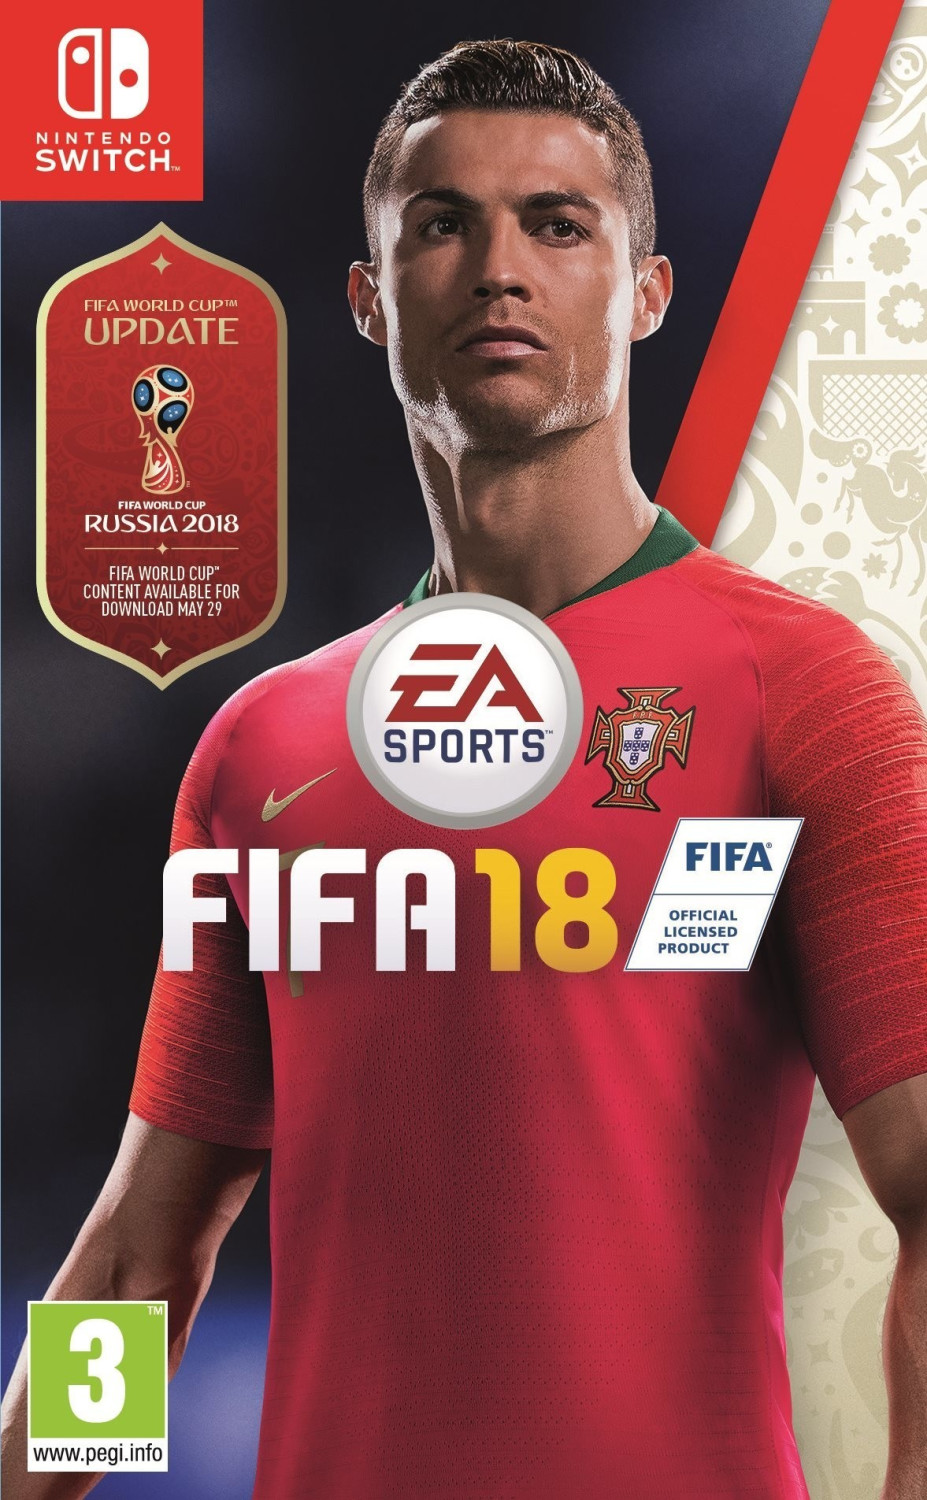 Buy FIFA 18 (Switch) from £23.27 (Today) – Best Deals on idealo.co.uk